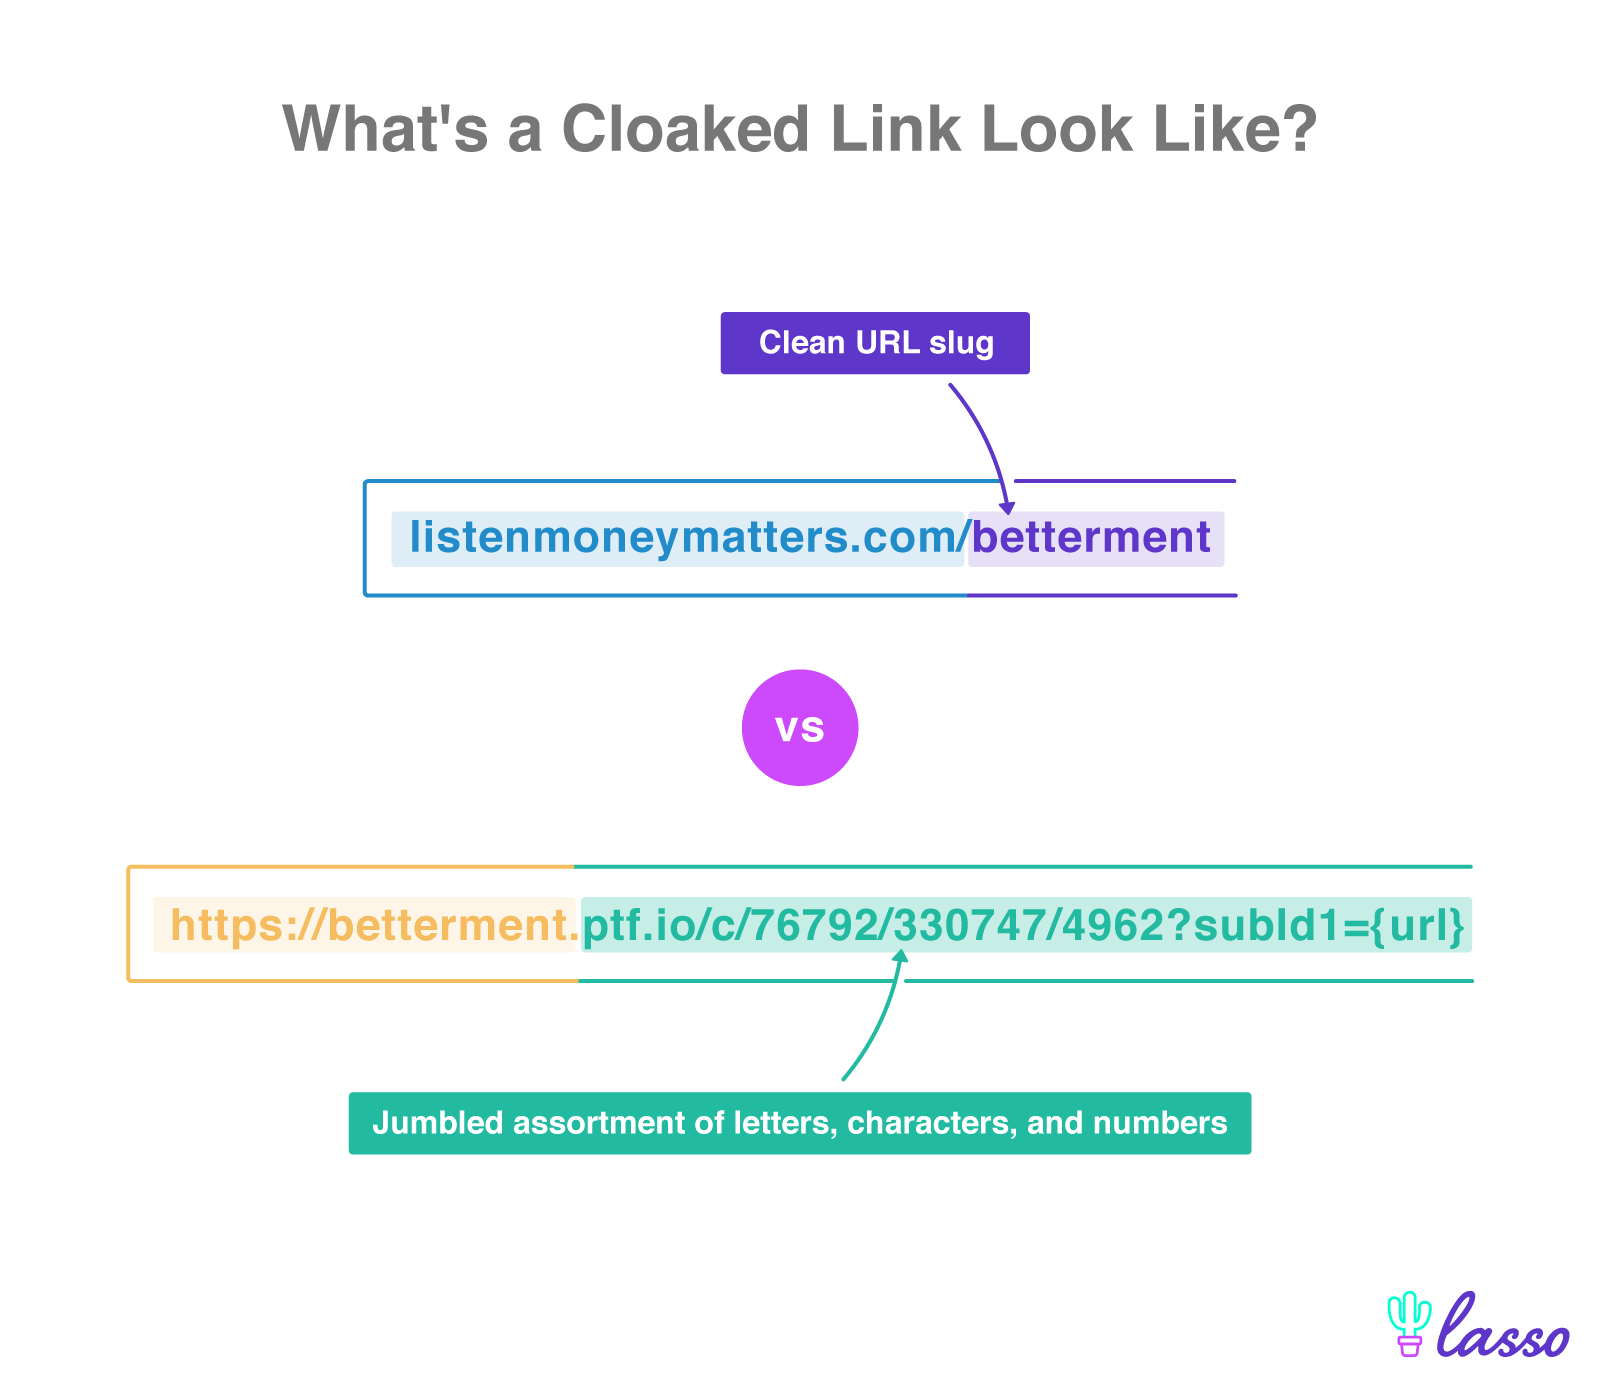 url examples of cloak and uncloaked links